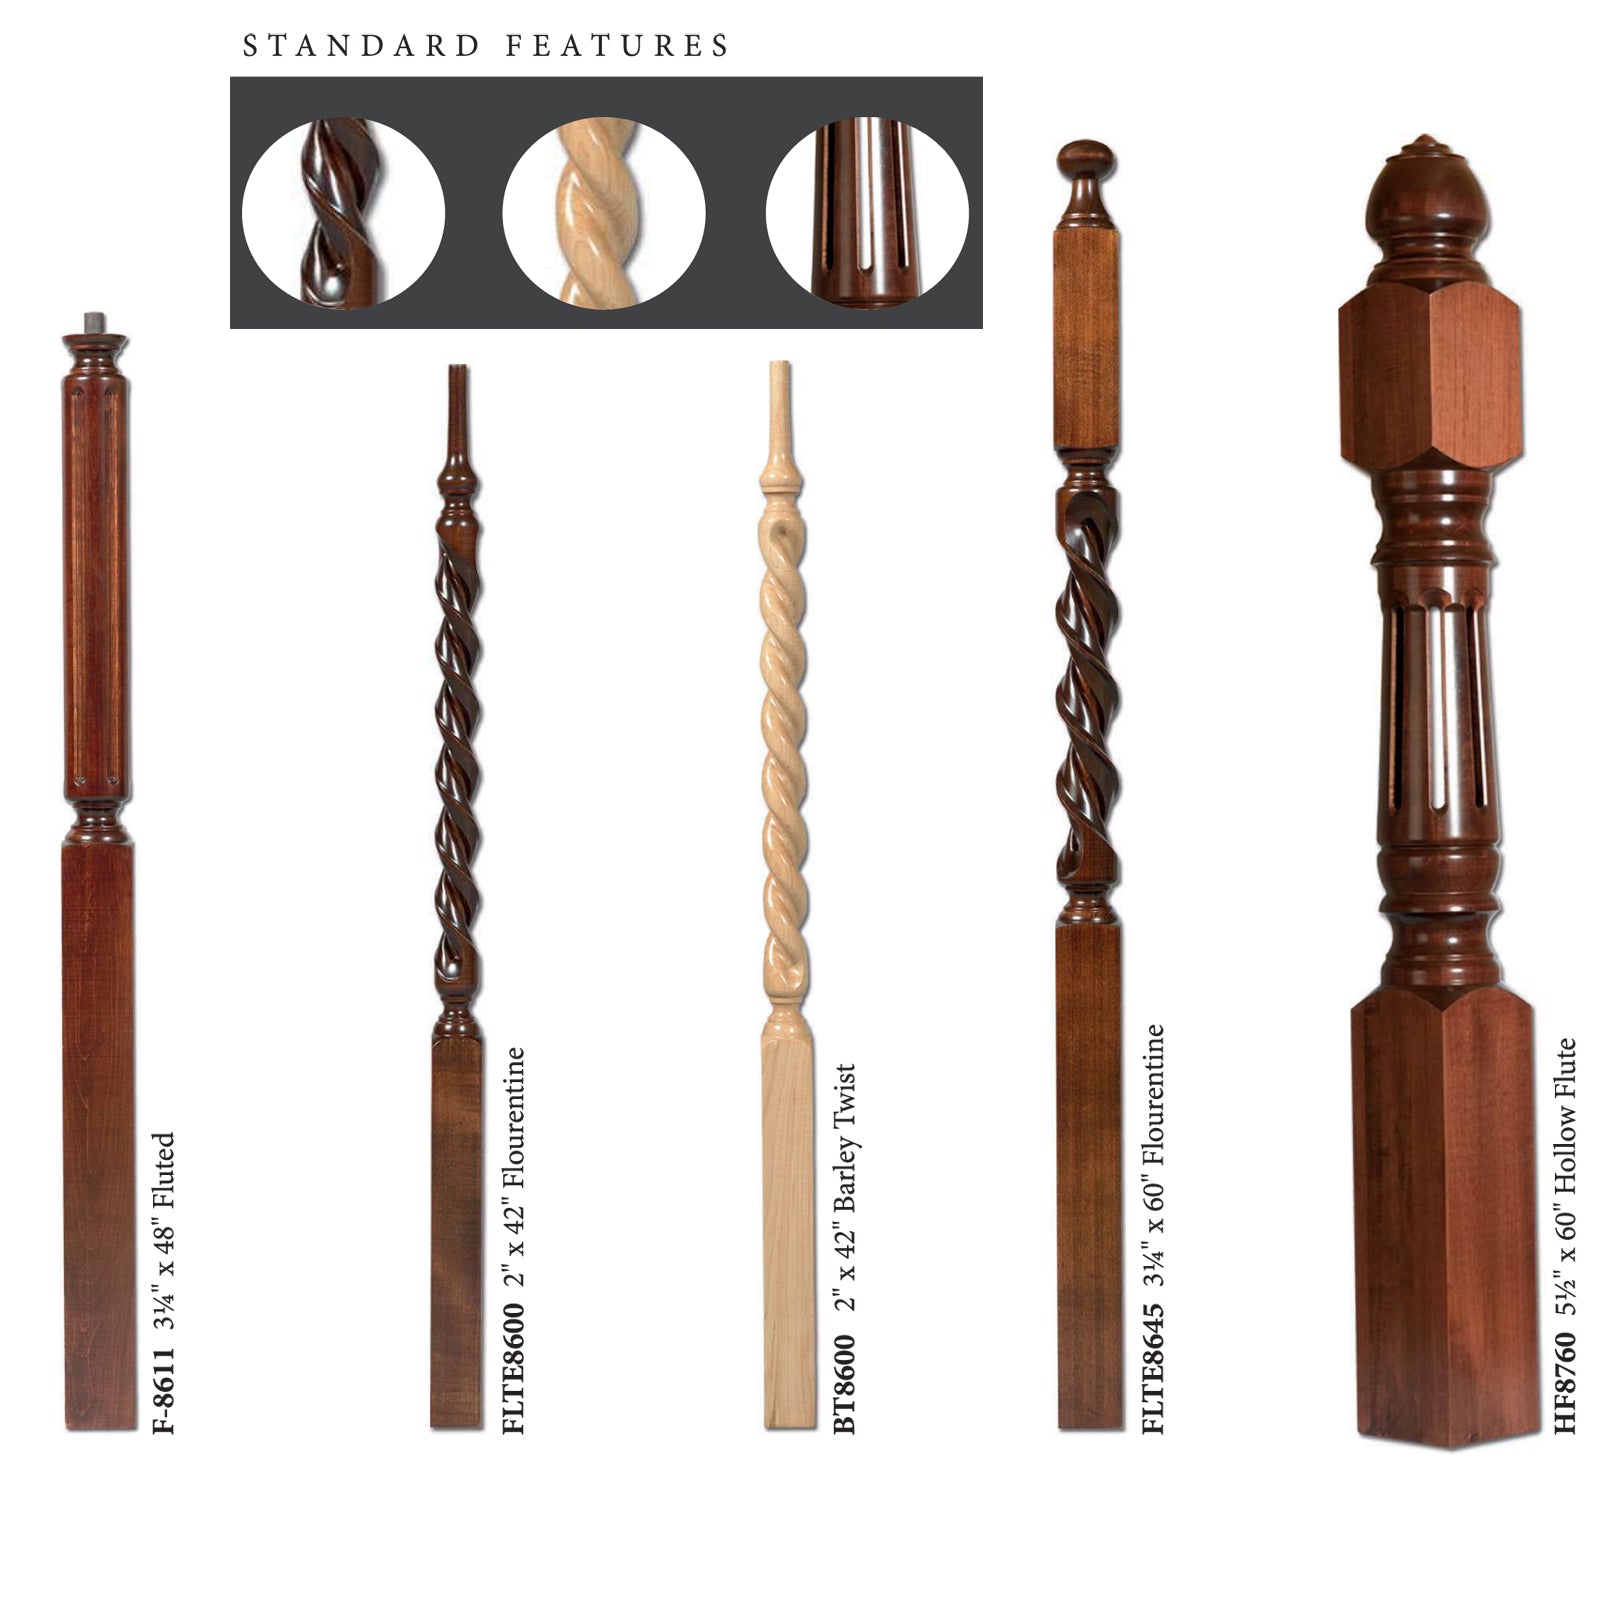 LaScala Grand Newel Posts and Baluster Spindles